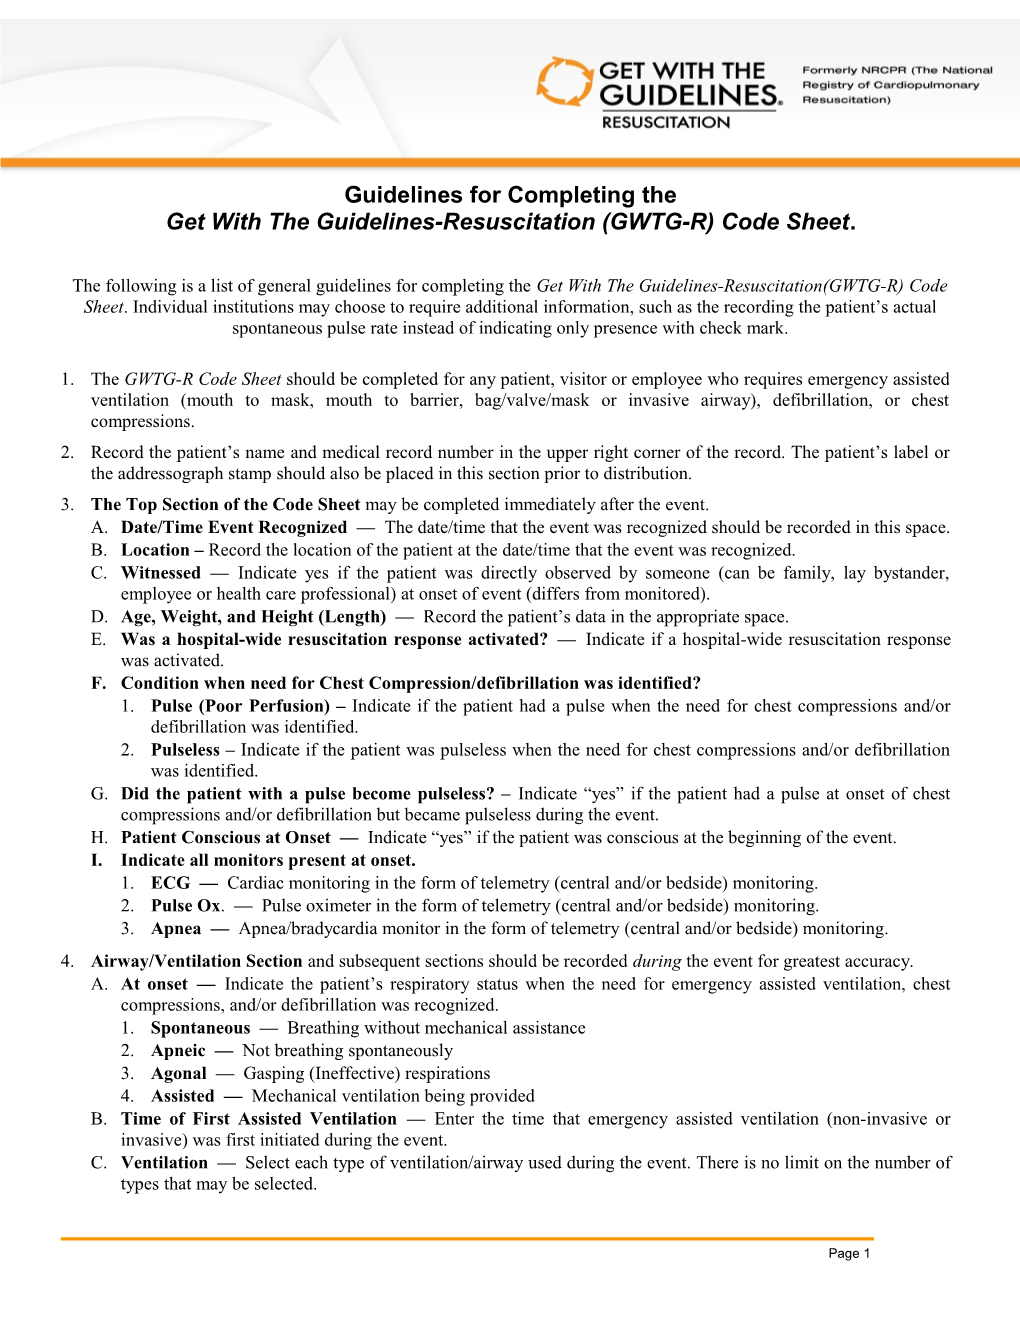 Guidelines for Completing the National Registry for Cardiopulmonary Resuscitation (NRCPR)